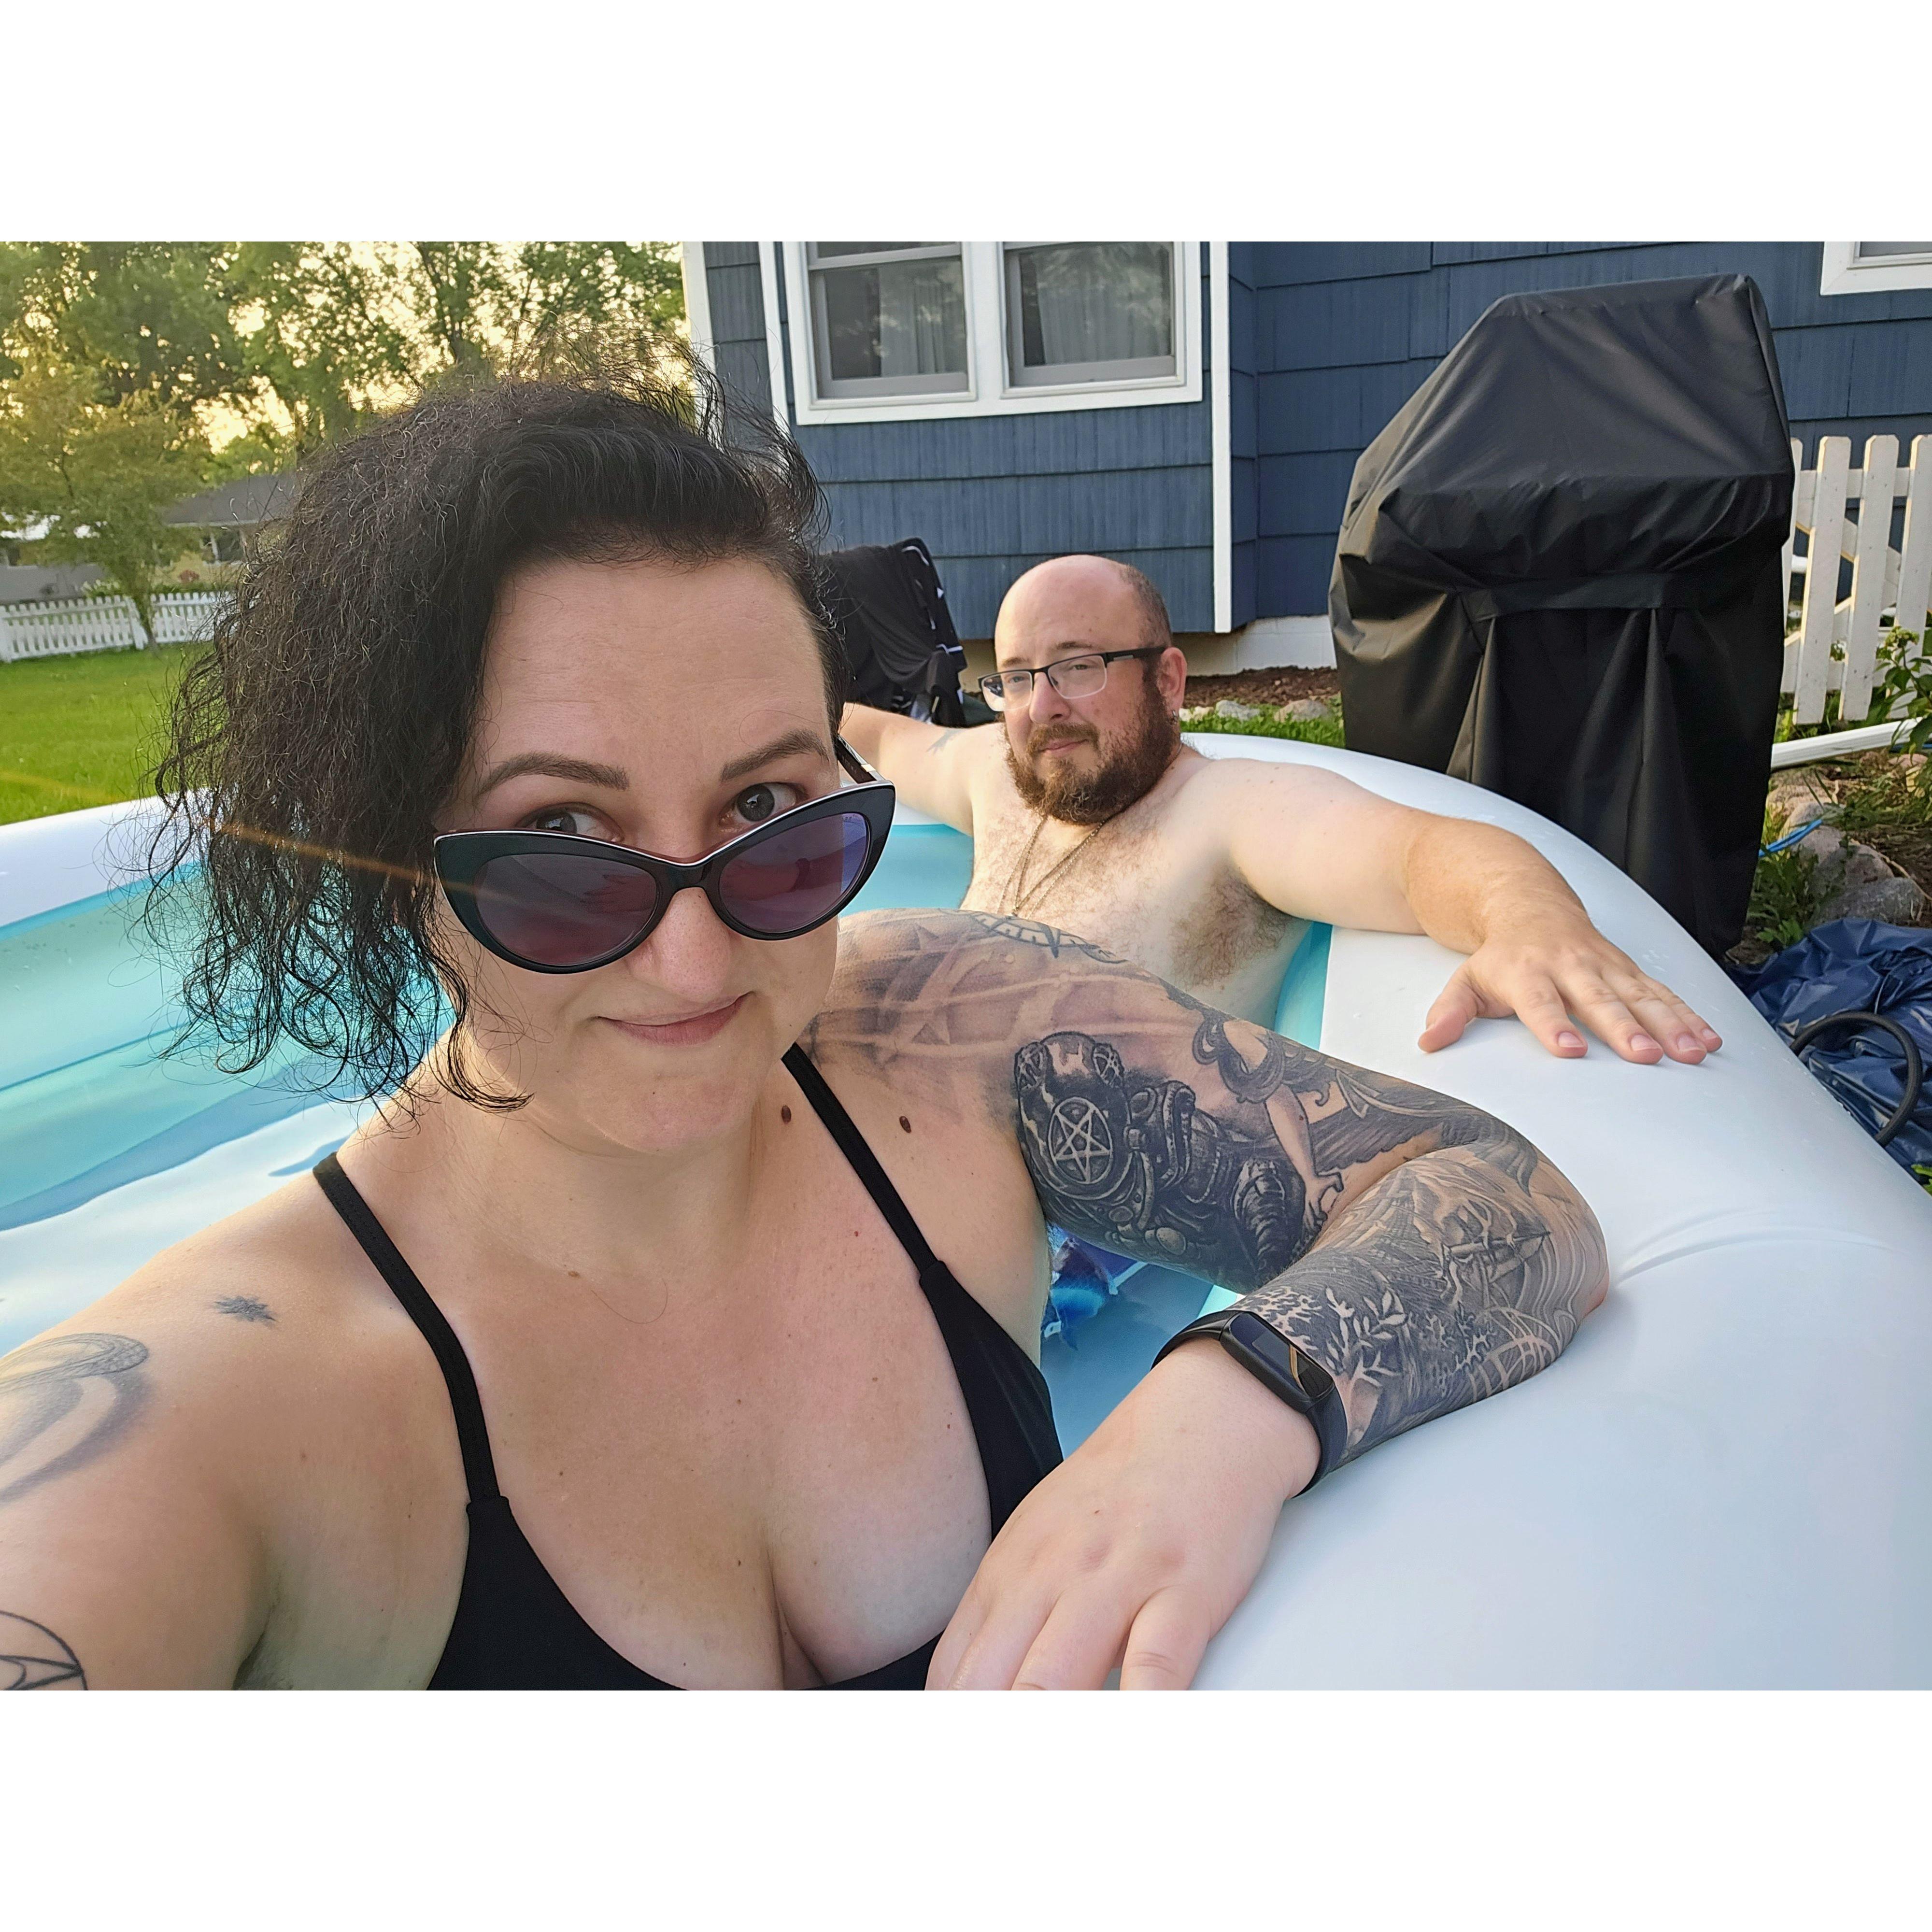 To Lauren's shock, Wisconsin summers are darn hot! Josh helped set up a fantastic soaking pool to help his favorite beach babe adjust to being landlocked.